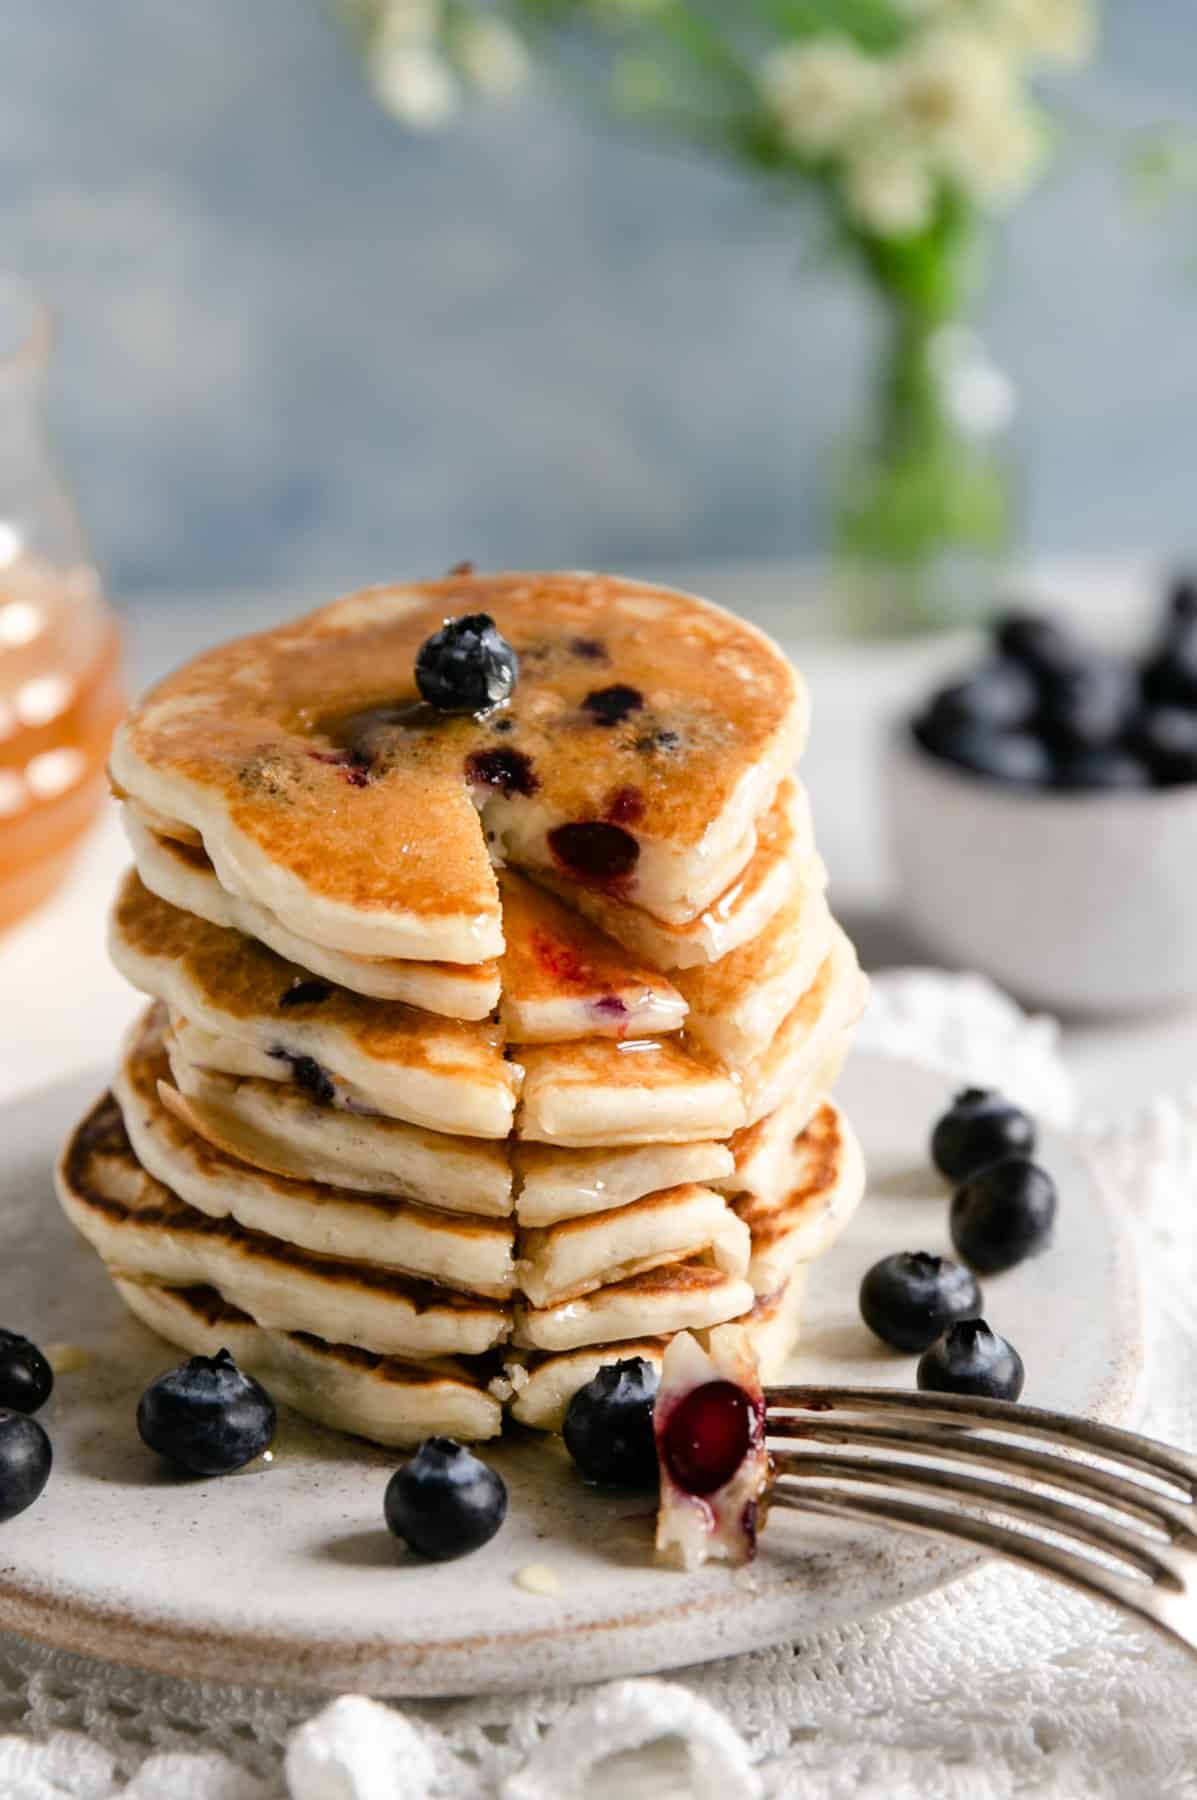 Straight ahead shot of stack of golden blueberry pancakes with a segment cut out